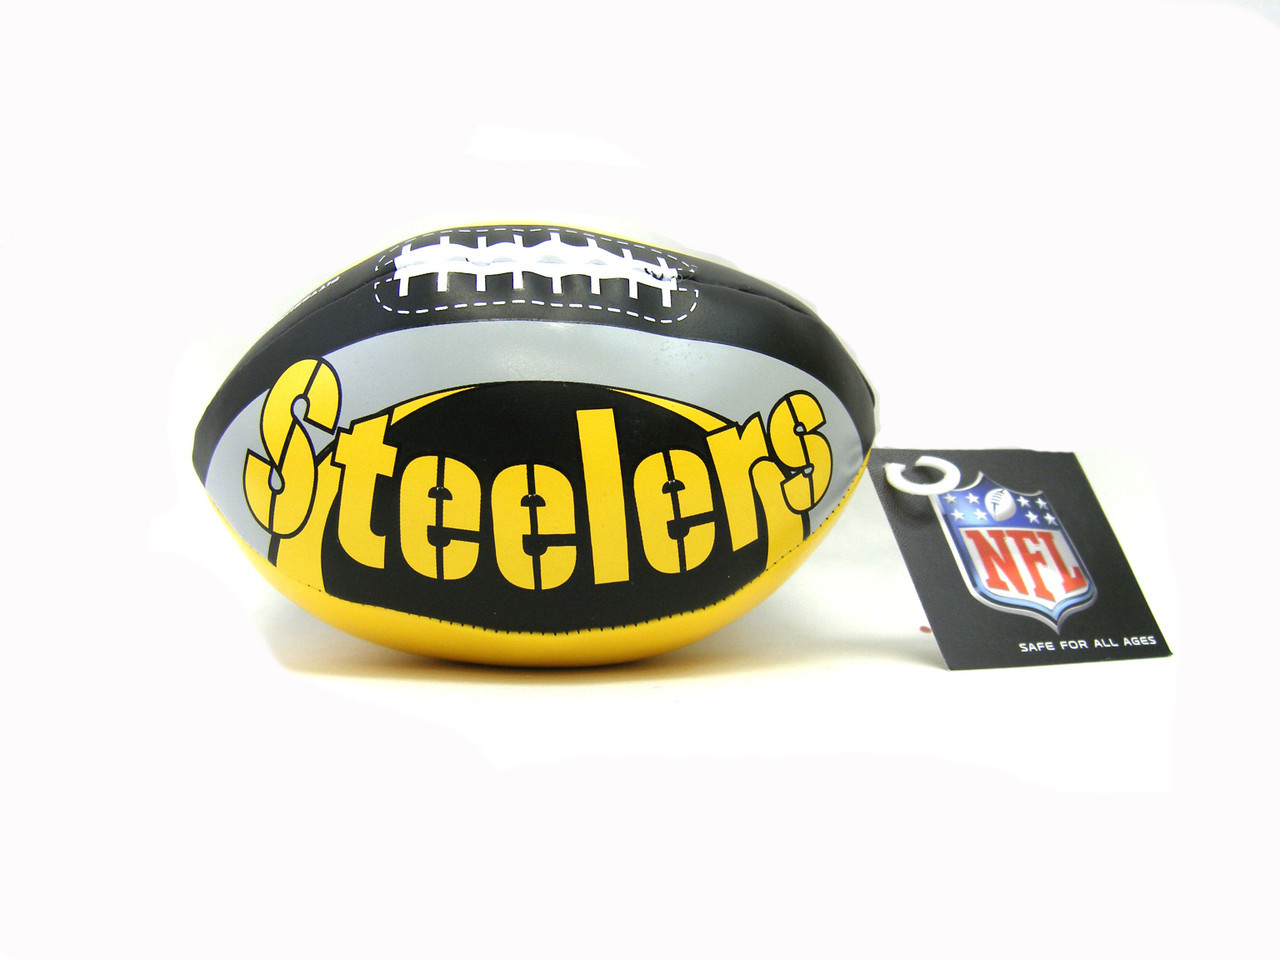 https://cdn11.bigcommerce.com/s-mhr53lwccw/images/stencil/1280x1280/products/855/8295/nfl-steelers-nfl-collectible-mini-soft-toy-football-6-inch__96002.1663975598.jpg?c=1?imbypass=on